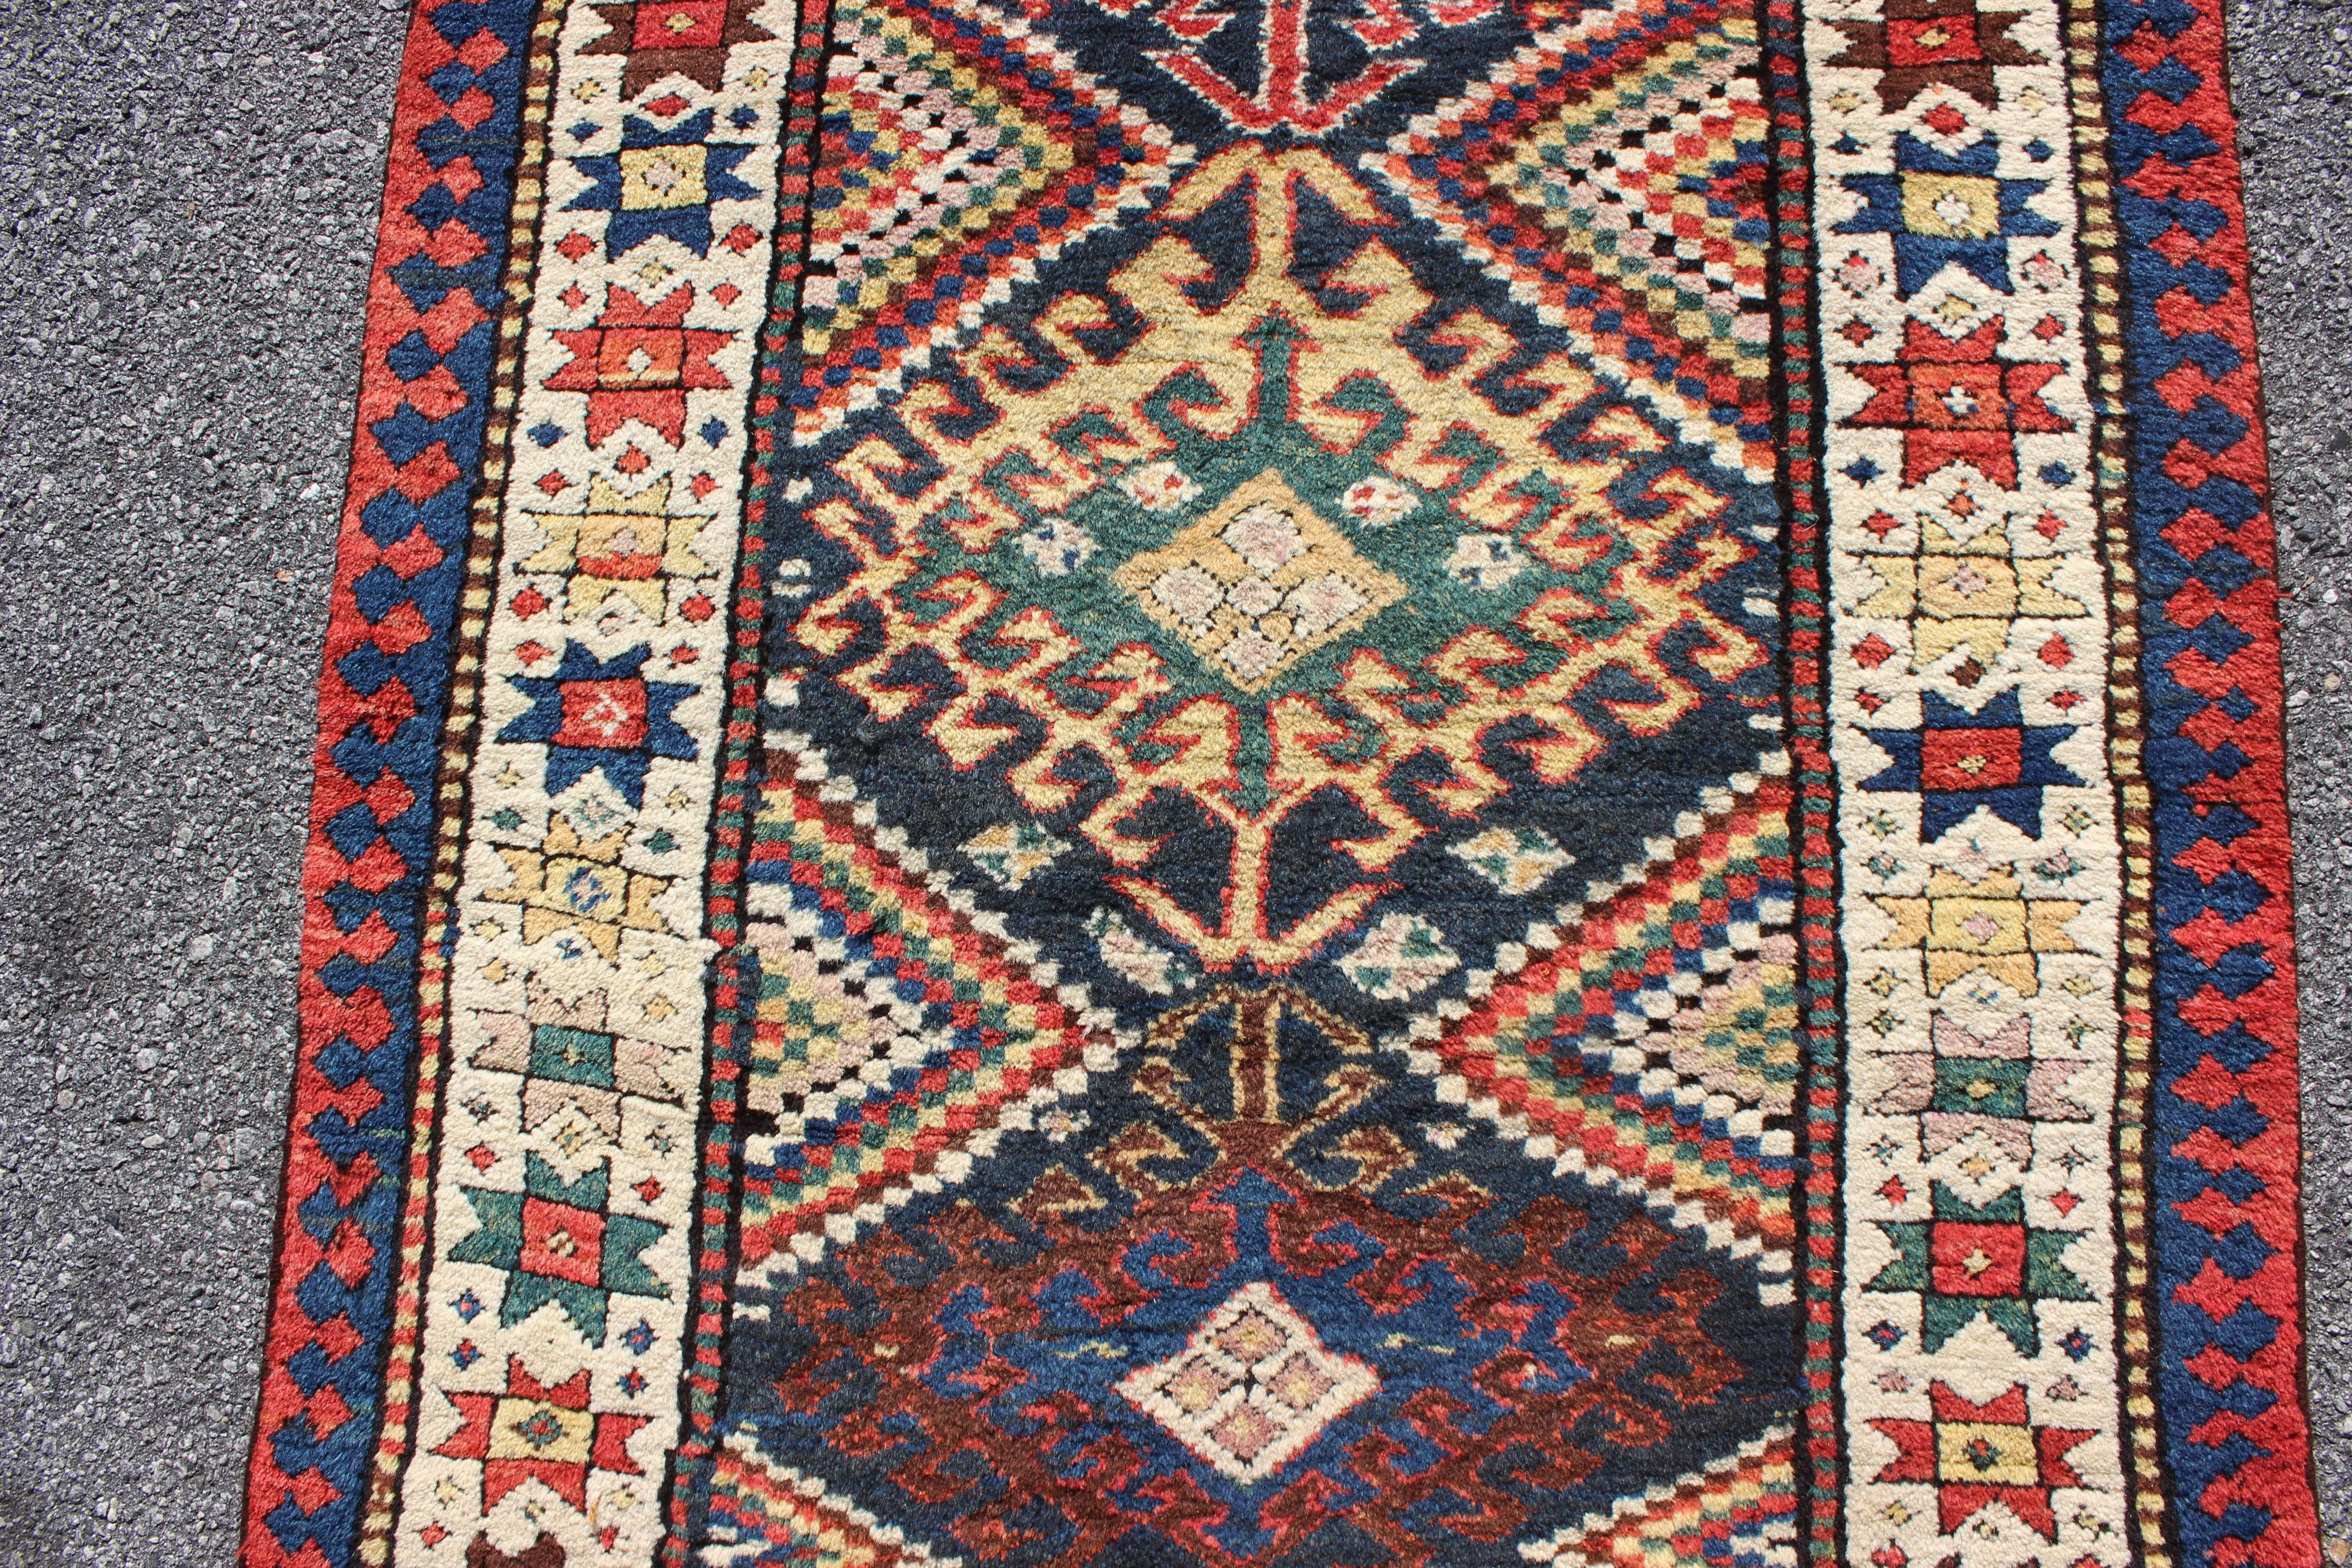 Hand-Knotted Multicolored Antique Caucasian Kazak Runner with Hooked Latch's and Star Motifs